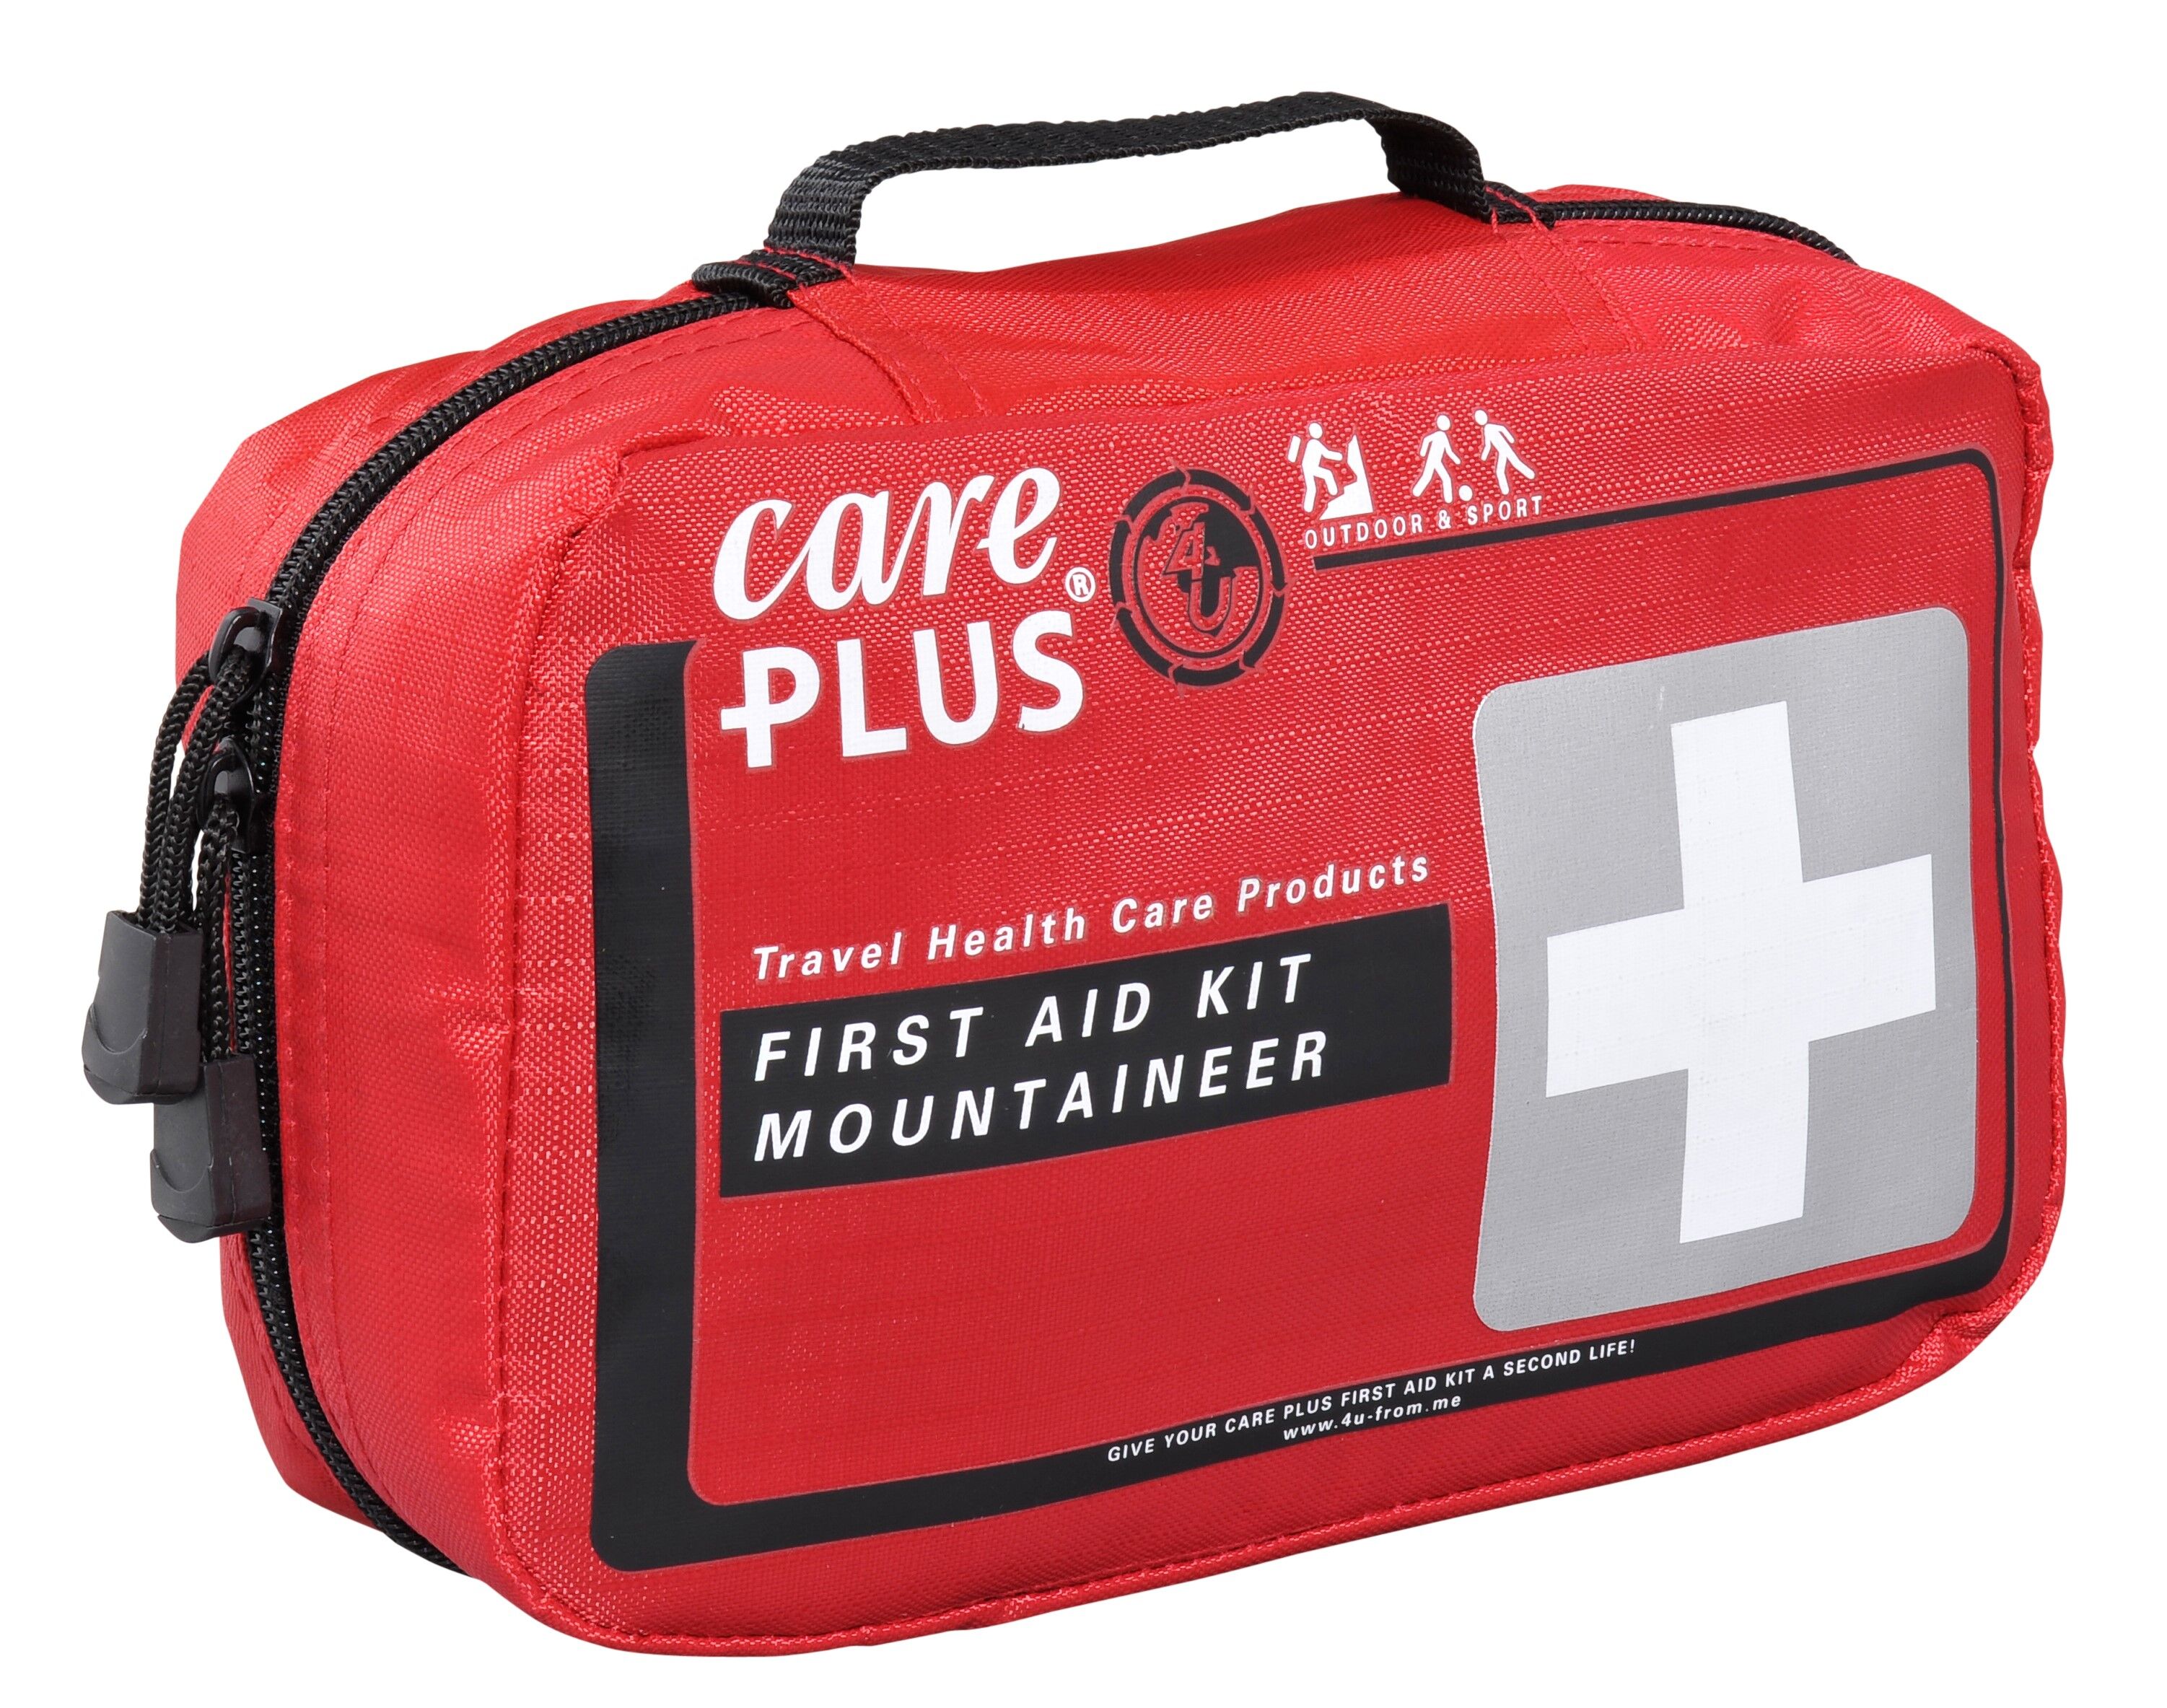 Care Plus First Aid Kit - Mountaineer - Erste-Hilfe-Set